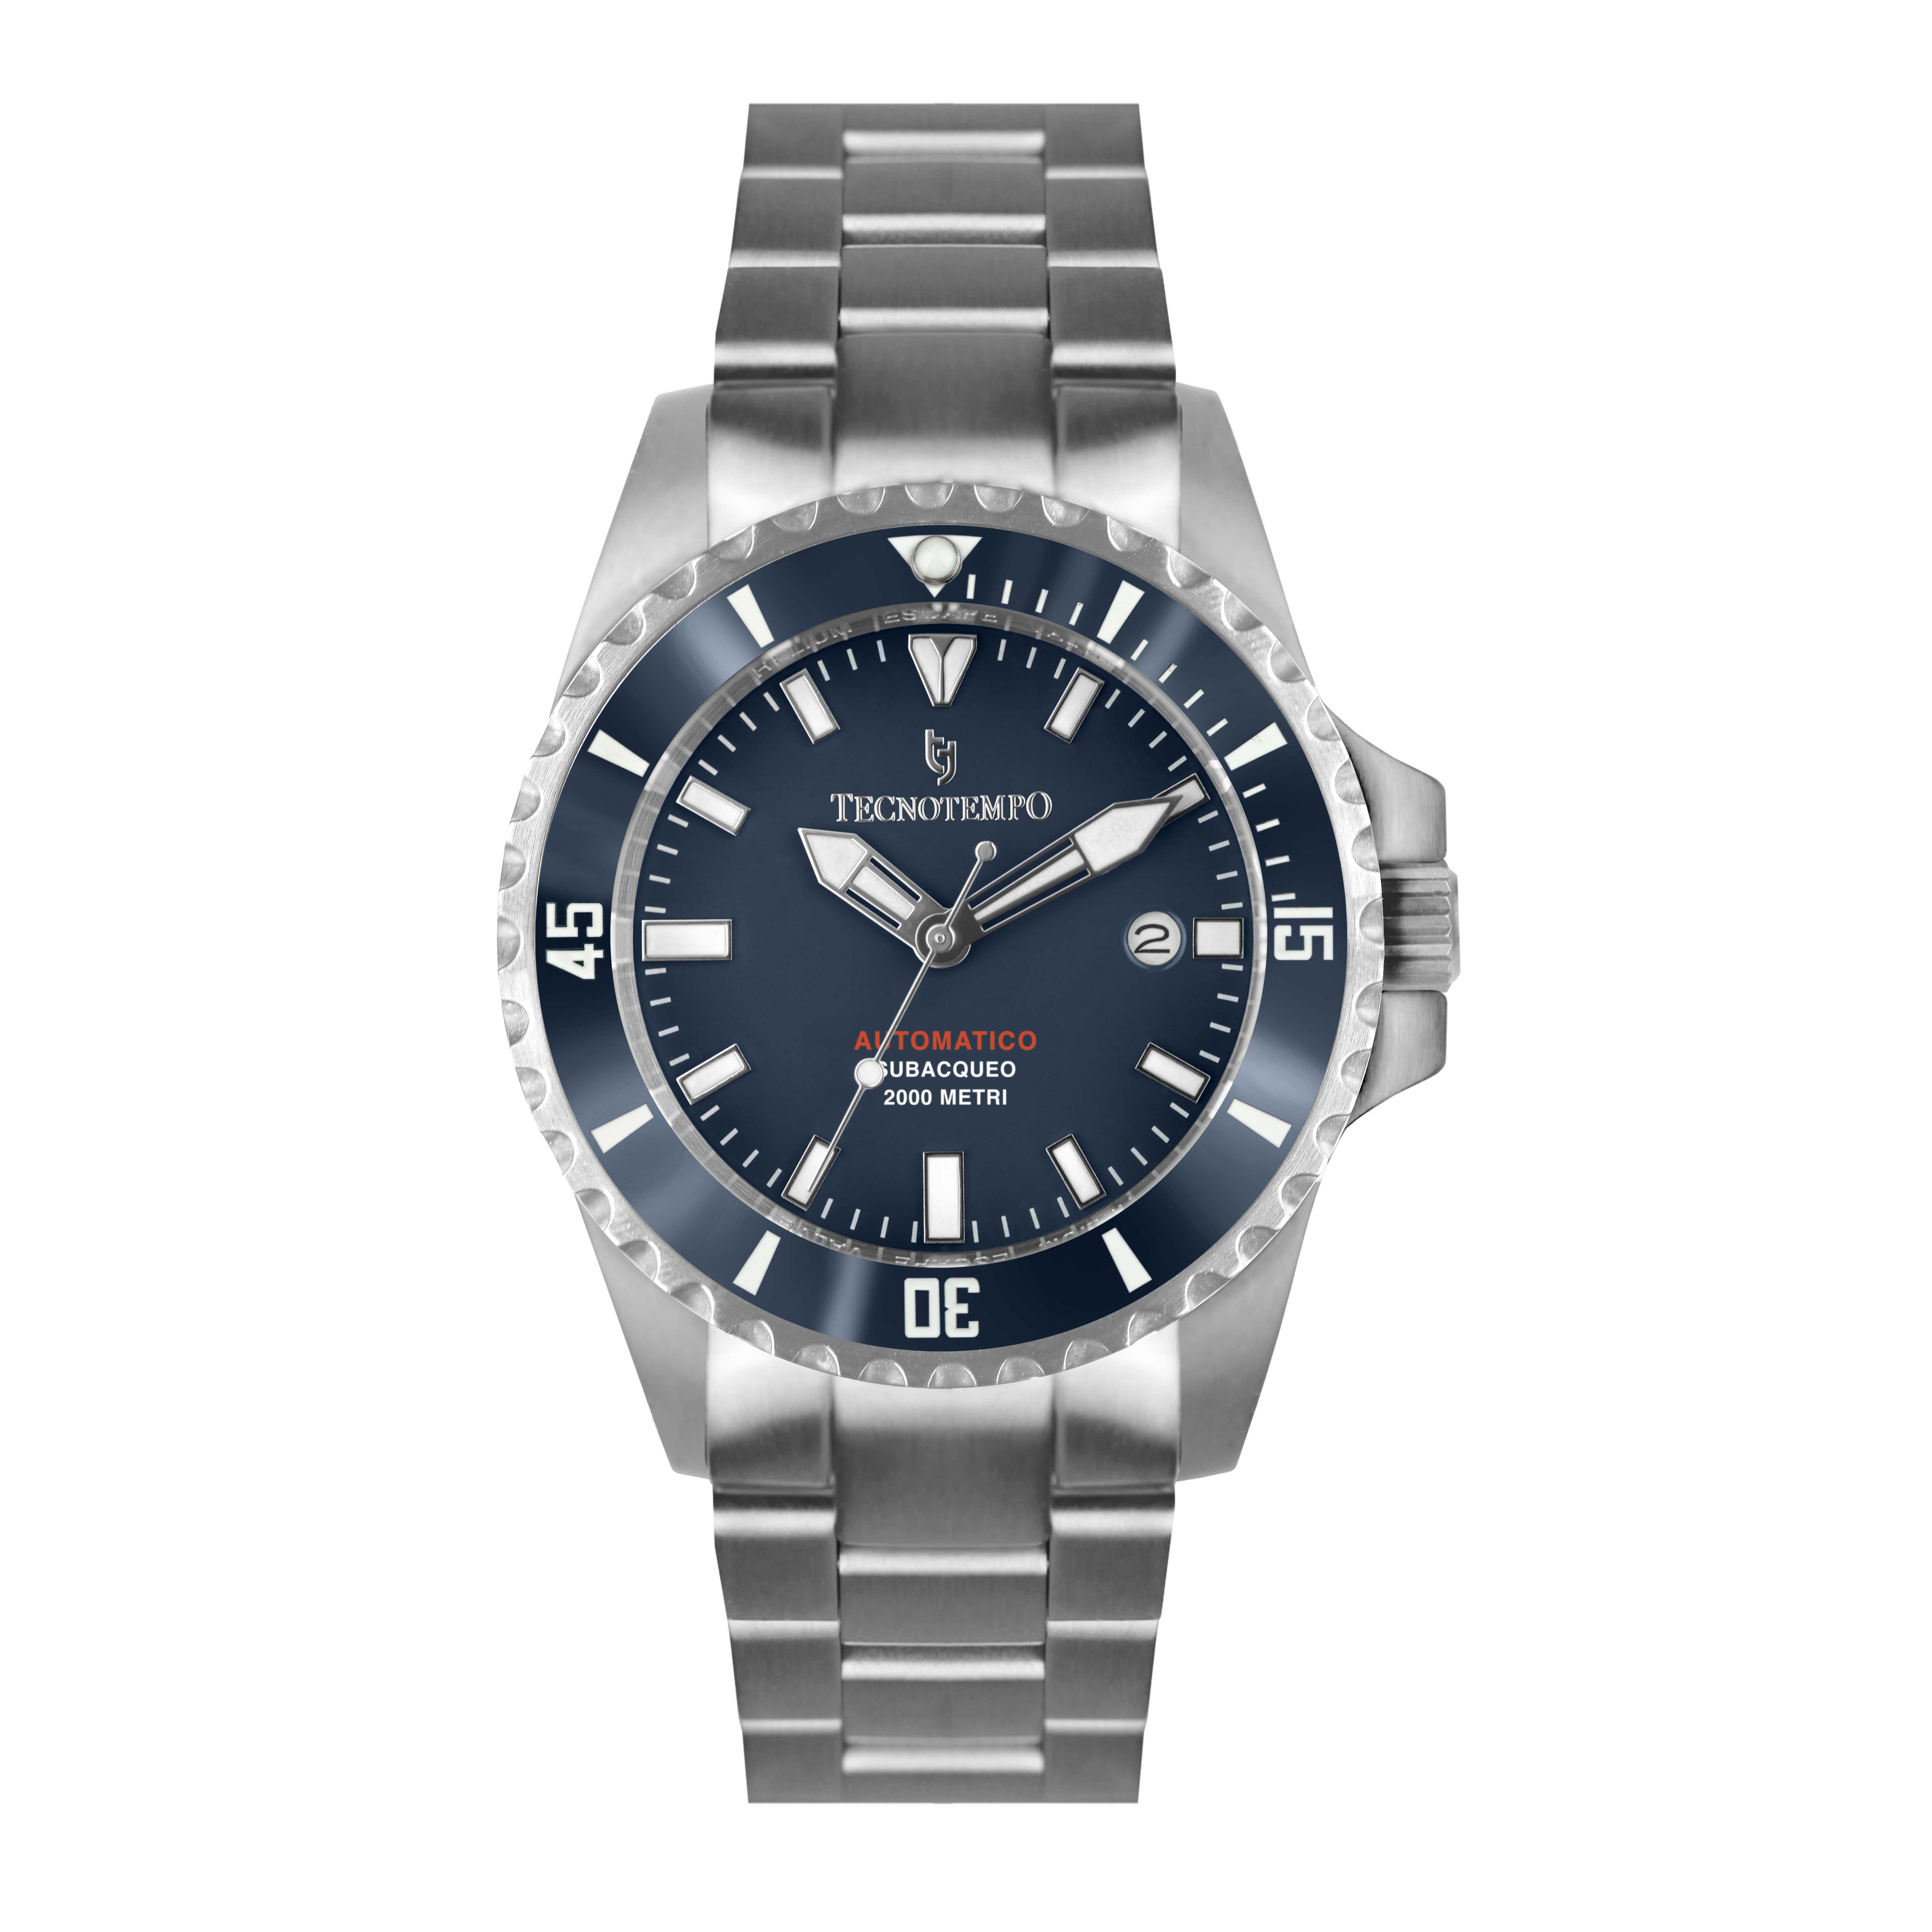 AUTOMATIC DIVER 2000 METERS - Shop online | Tecnotempo watches